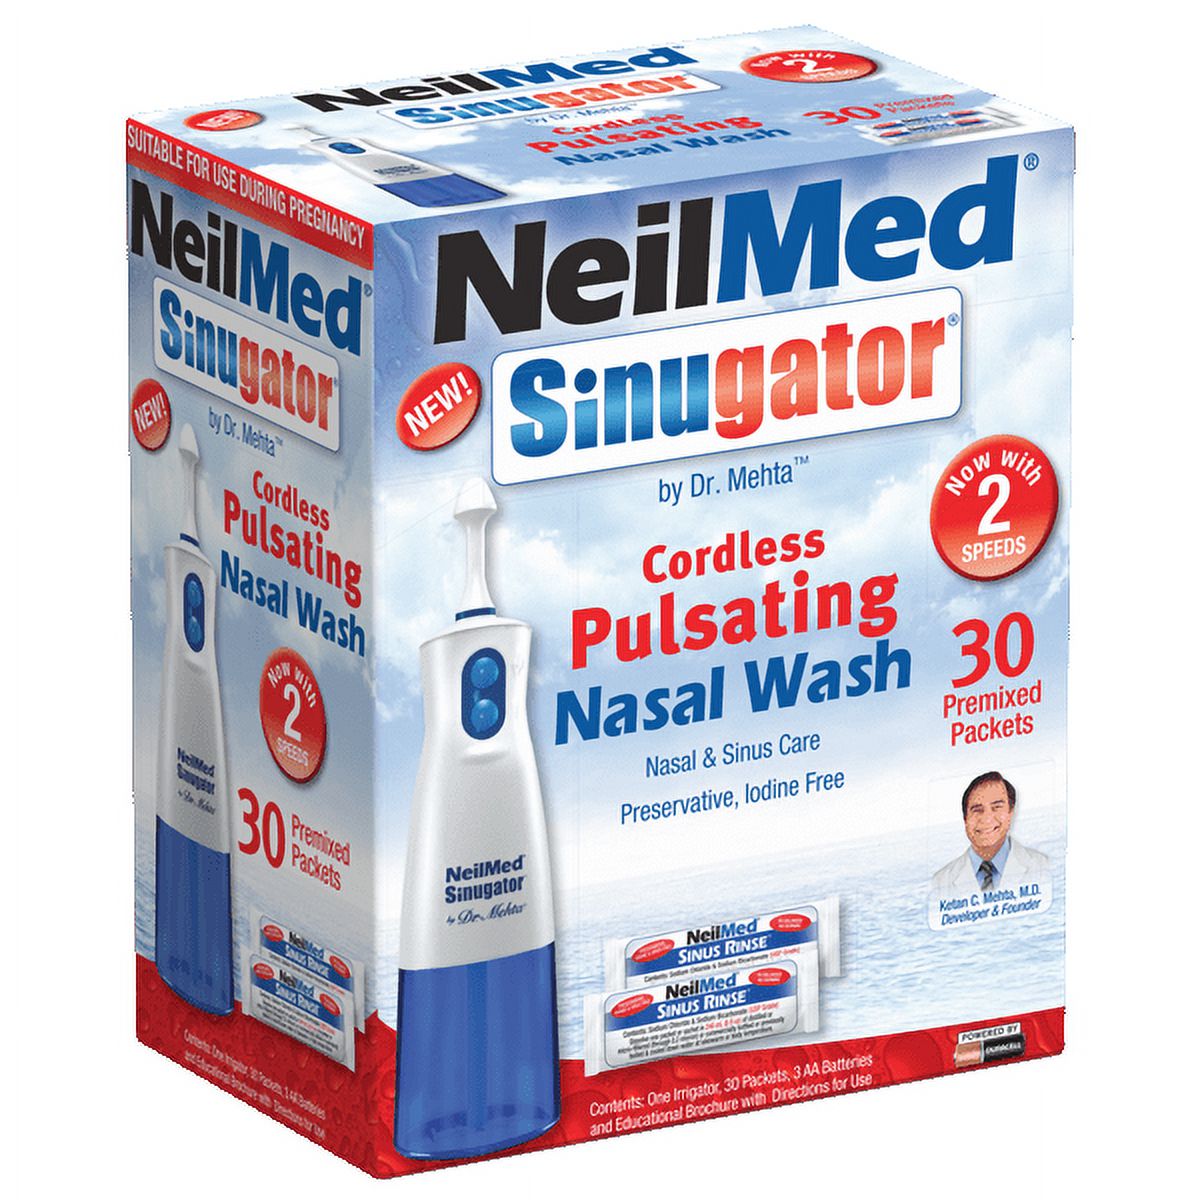 NeilMed Sinugator Cordless Pulsating Nasal Irrigator (Dual Speed) with 30 Premixed Packets and 3 AA Batteries - Blue - image 1 of 7